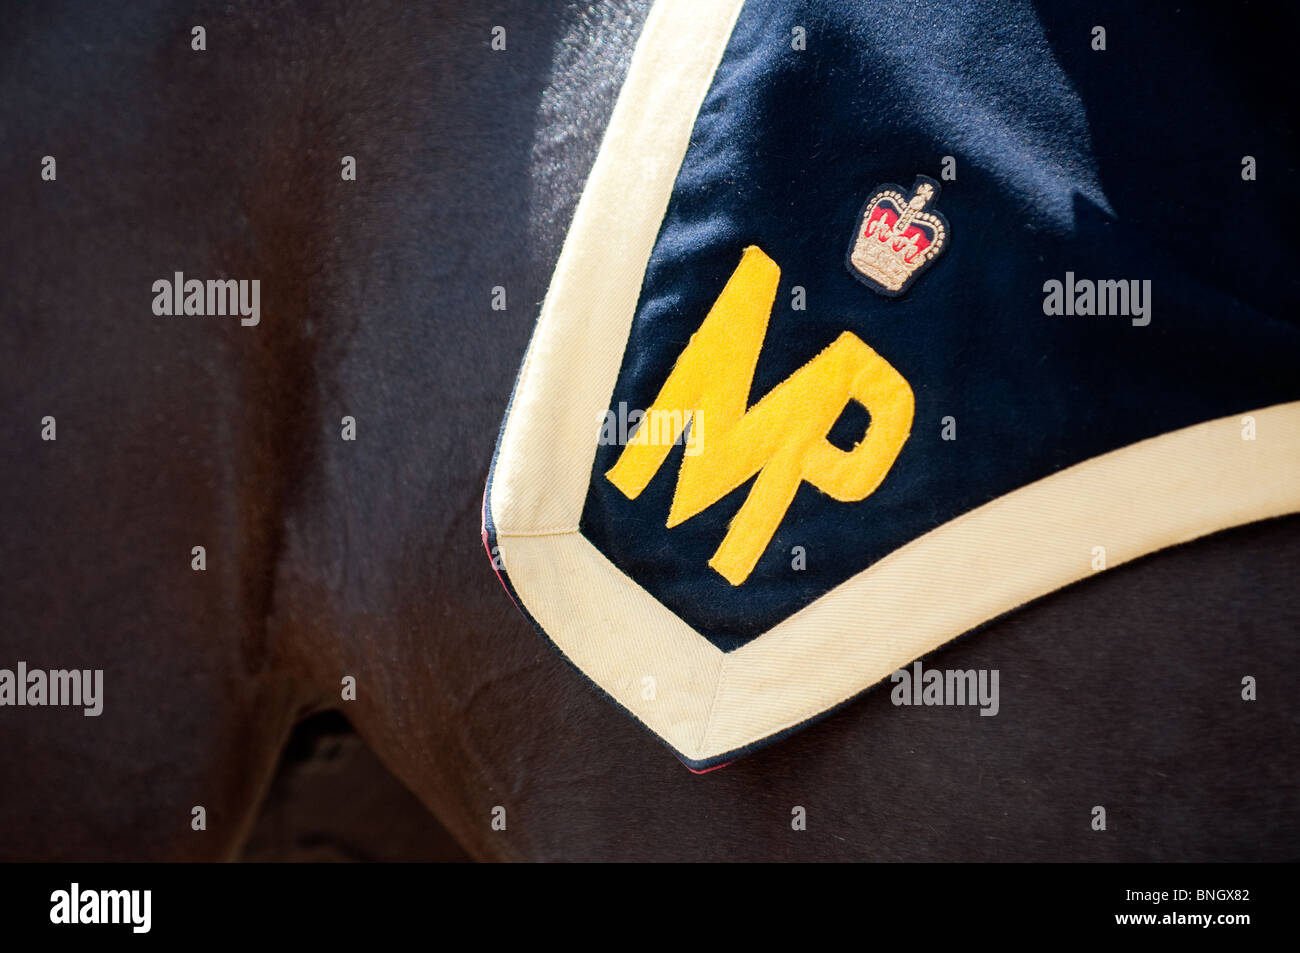 The Insignia Of The Royal Canadian Mounted Police On A Horse Blanket Stock Photo